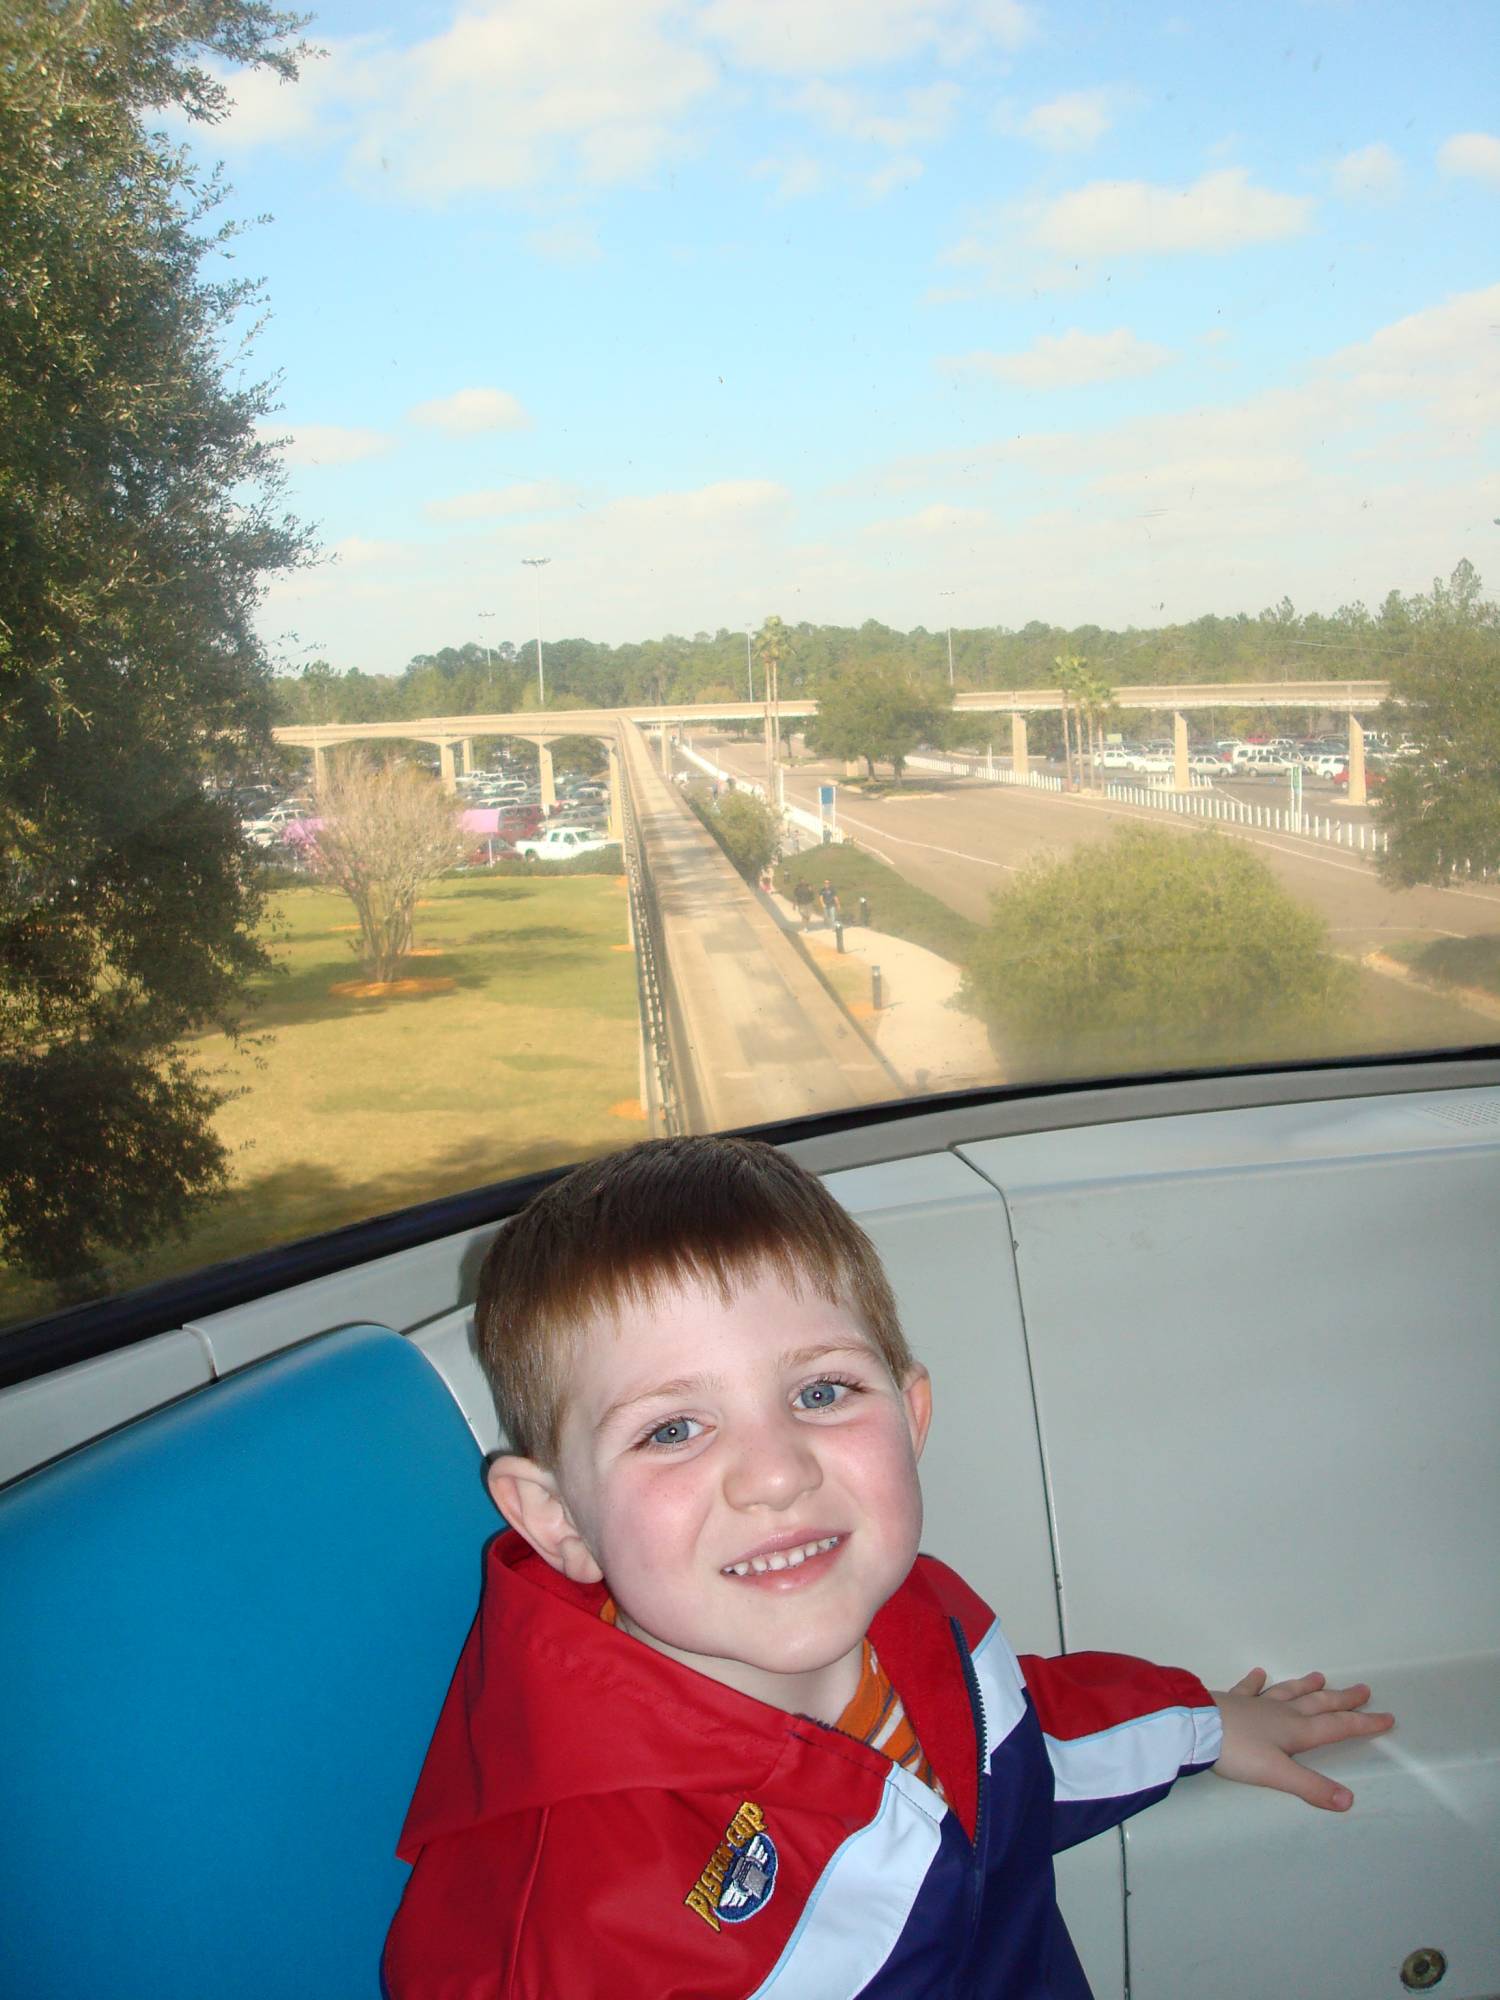 Monorail - Riding in the front